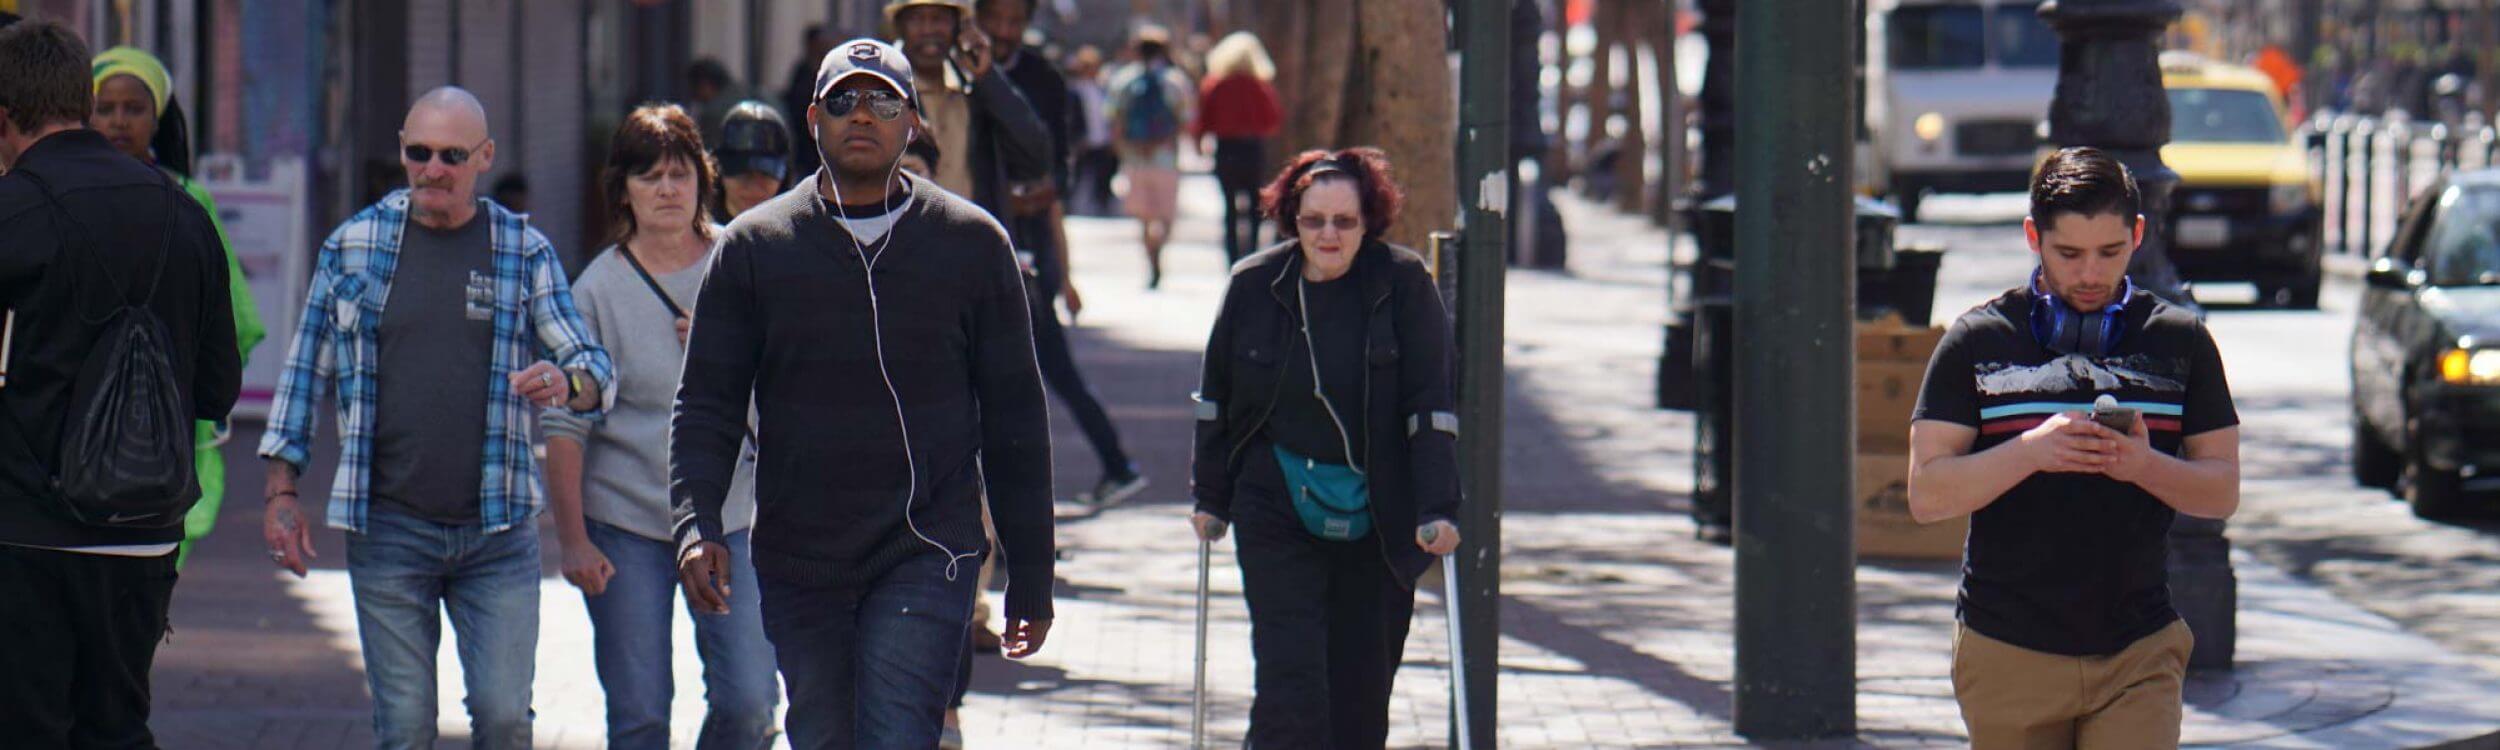 Tell the SFMTA: I support making 6th Street safer for people walking